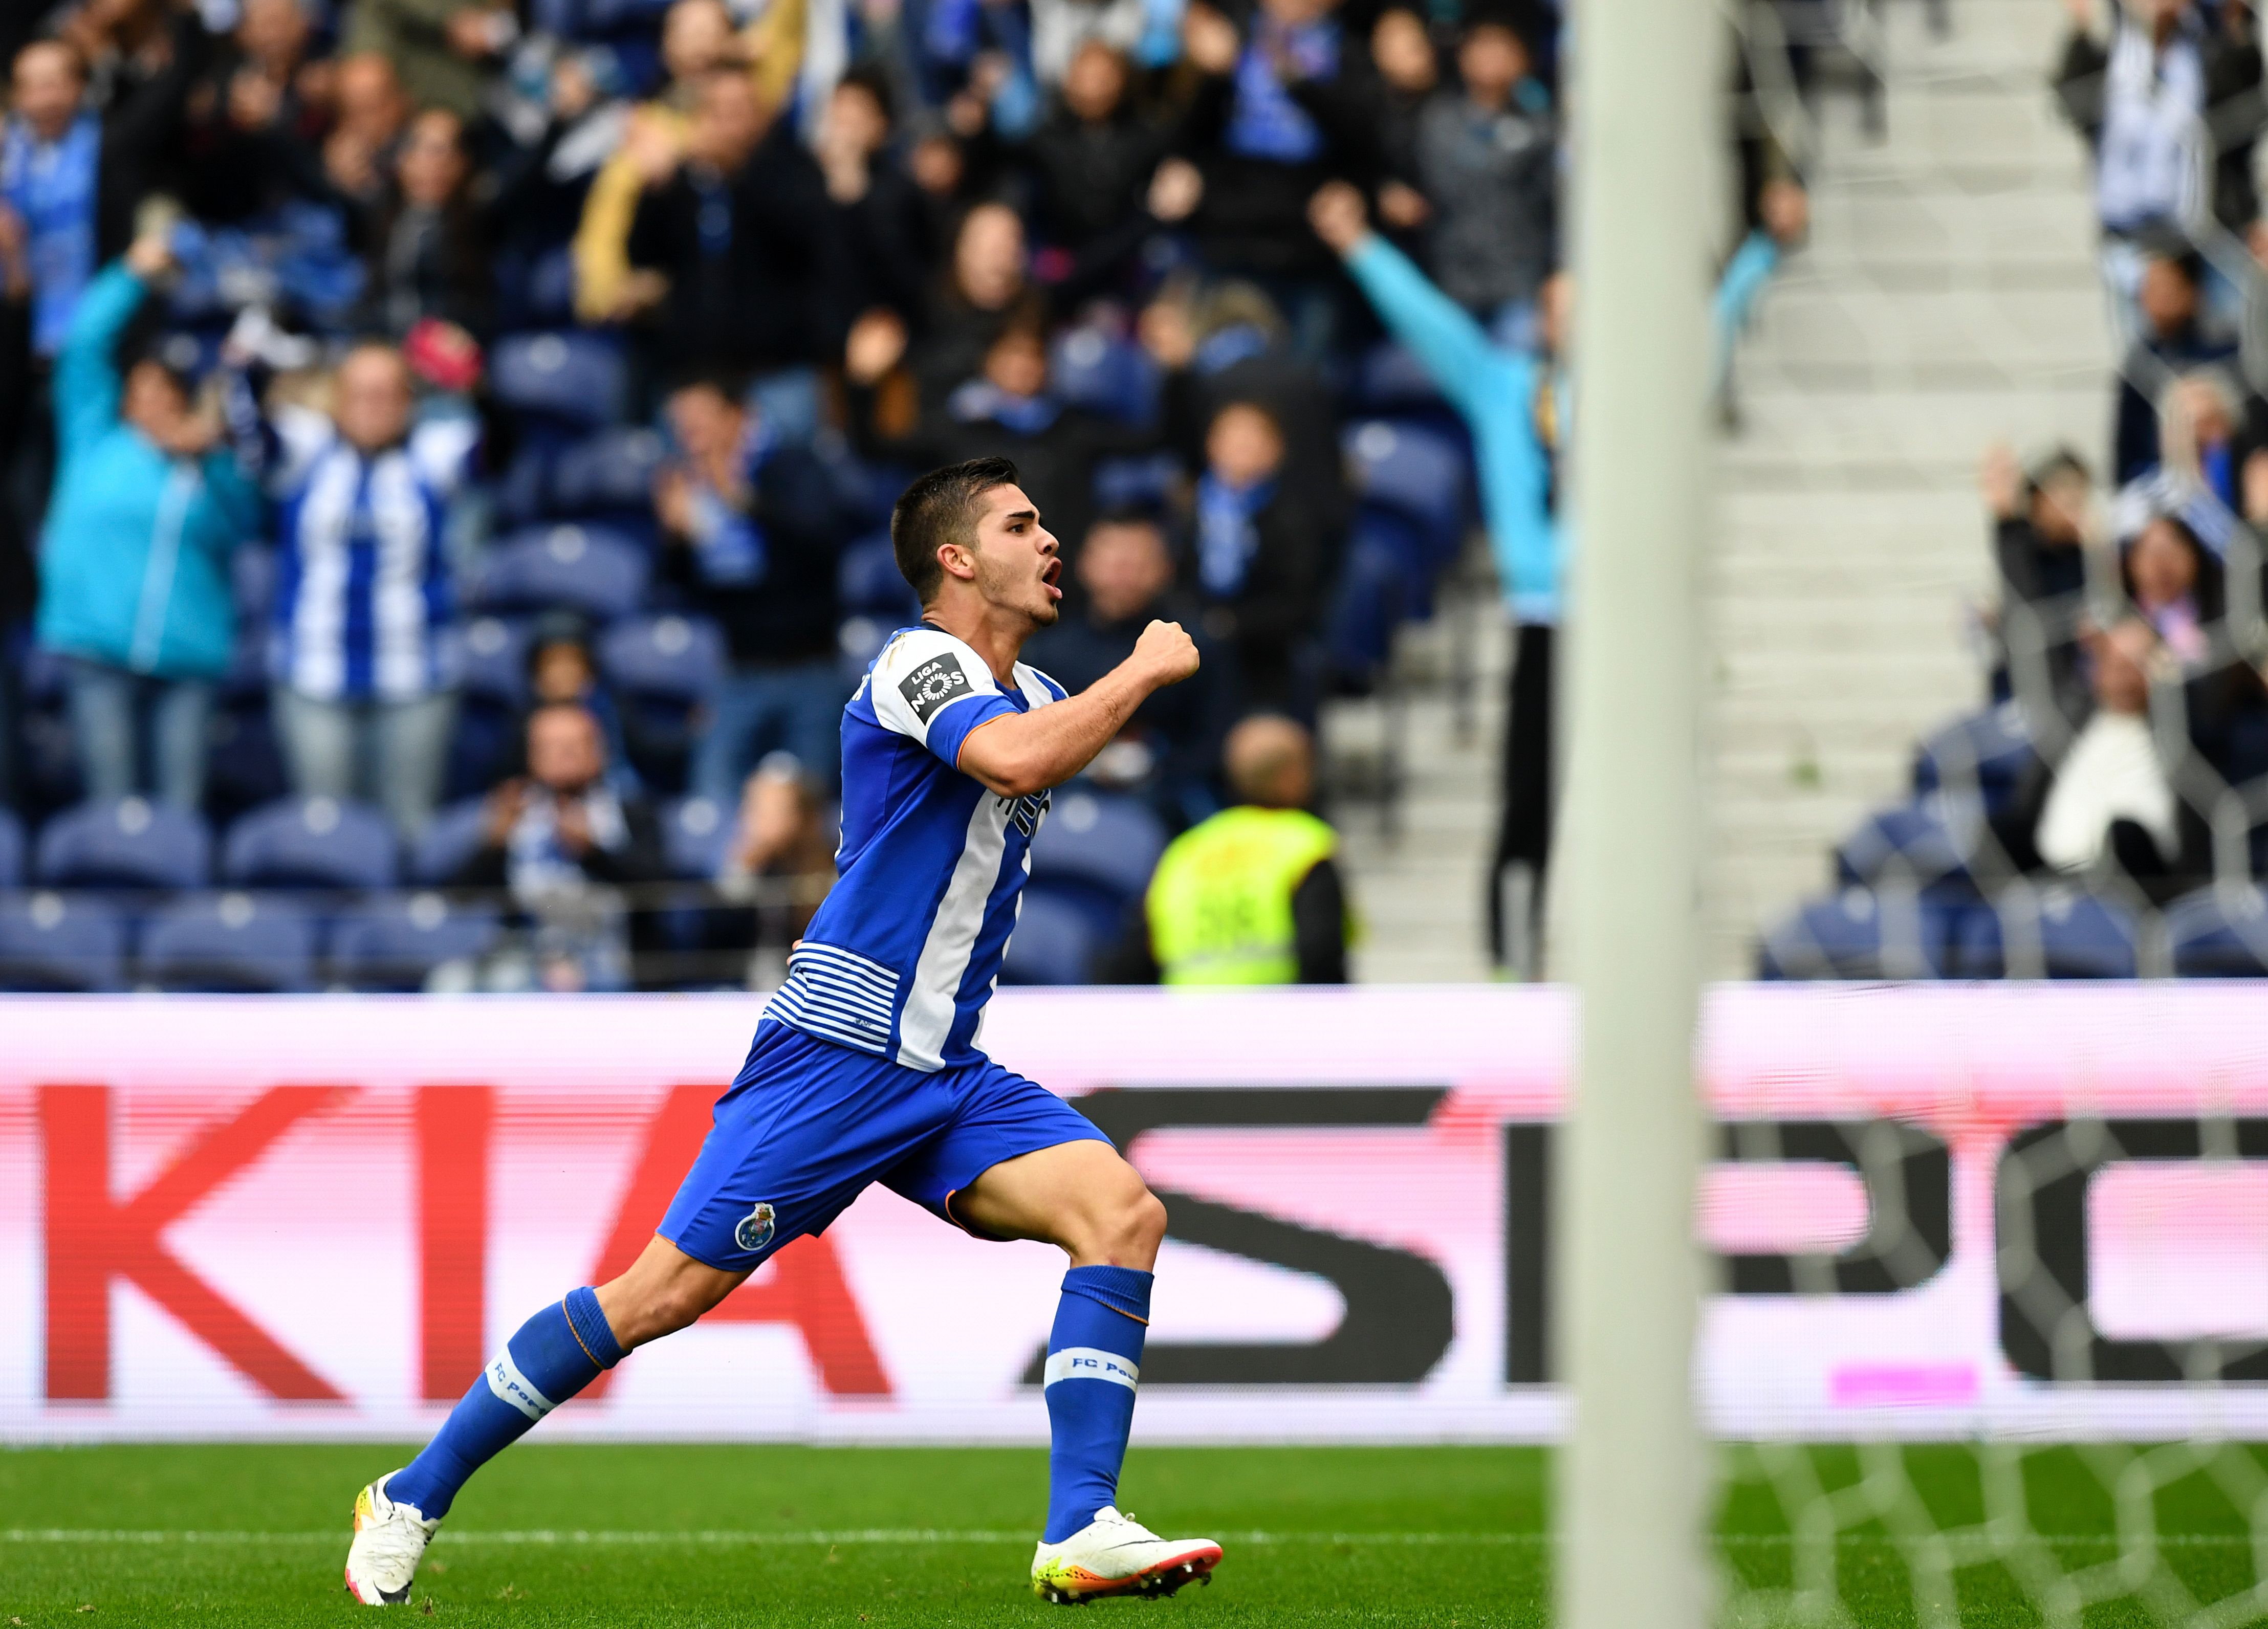 Porto's midfielder Andre Silva celebrates after scoring a goal during the Portuguese league football match FC Porto vs Boavista FC at the Dragao stadium in Porto on May 14, 2016. / AFP / FRANCISCO LEONG        (Photo credit should read FRANCISCO LEONG/AFP/Getty Images)